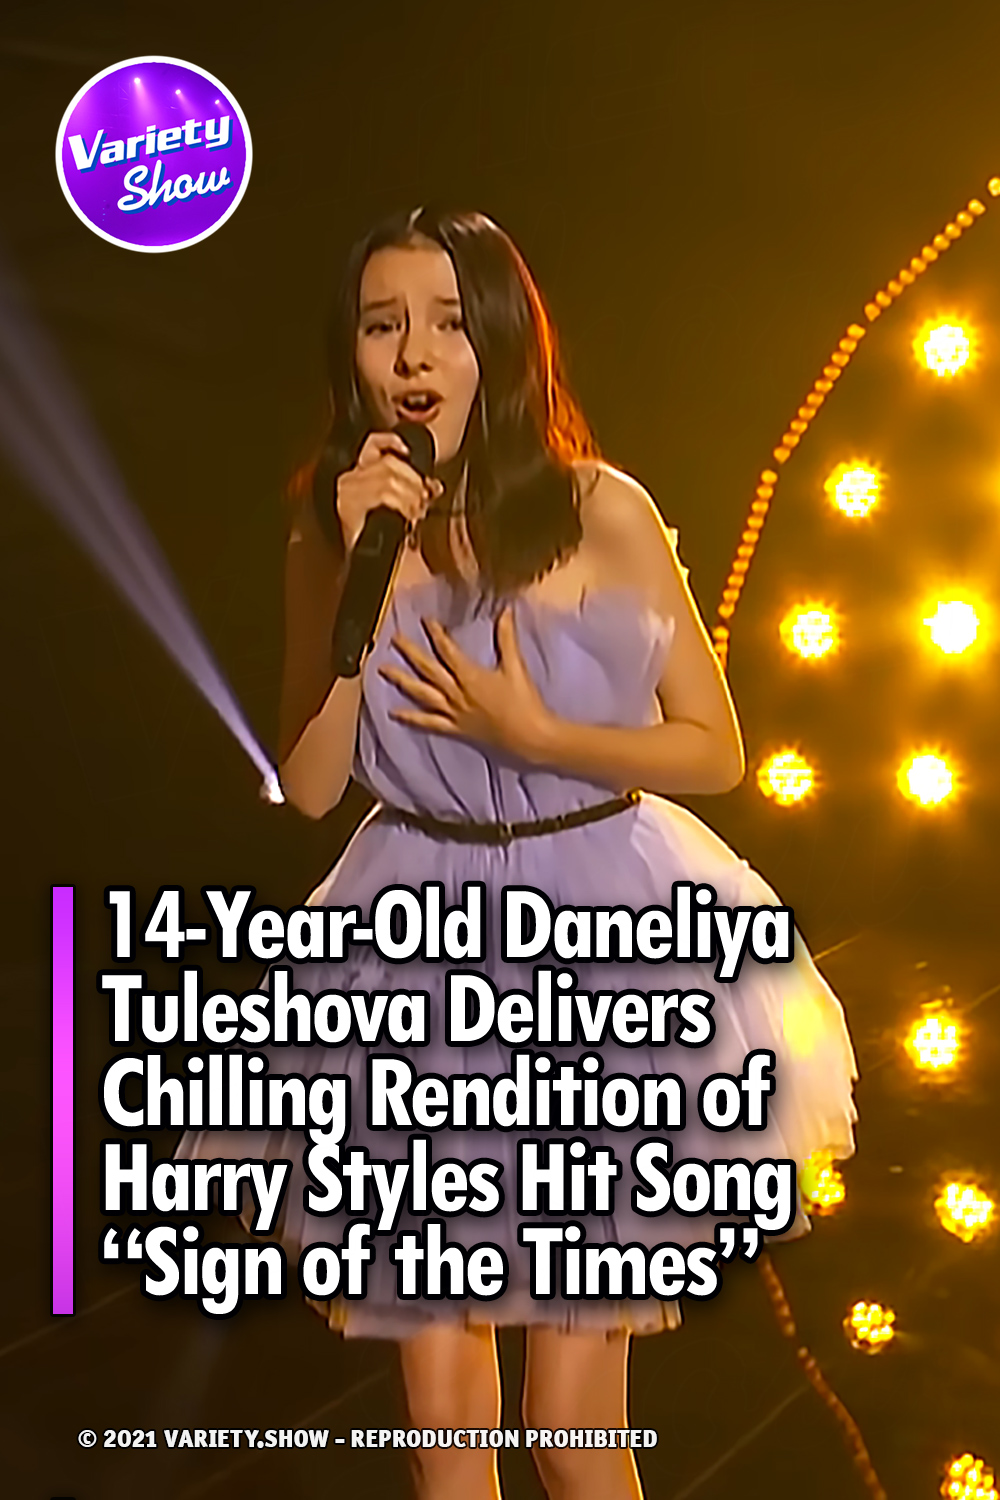 14-Year-Old Daneliya Tuleshova Delivers Chilling Rendition of Harry Styles Hit Song \